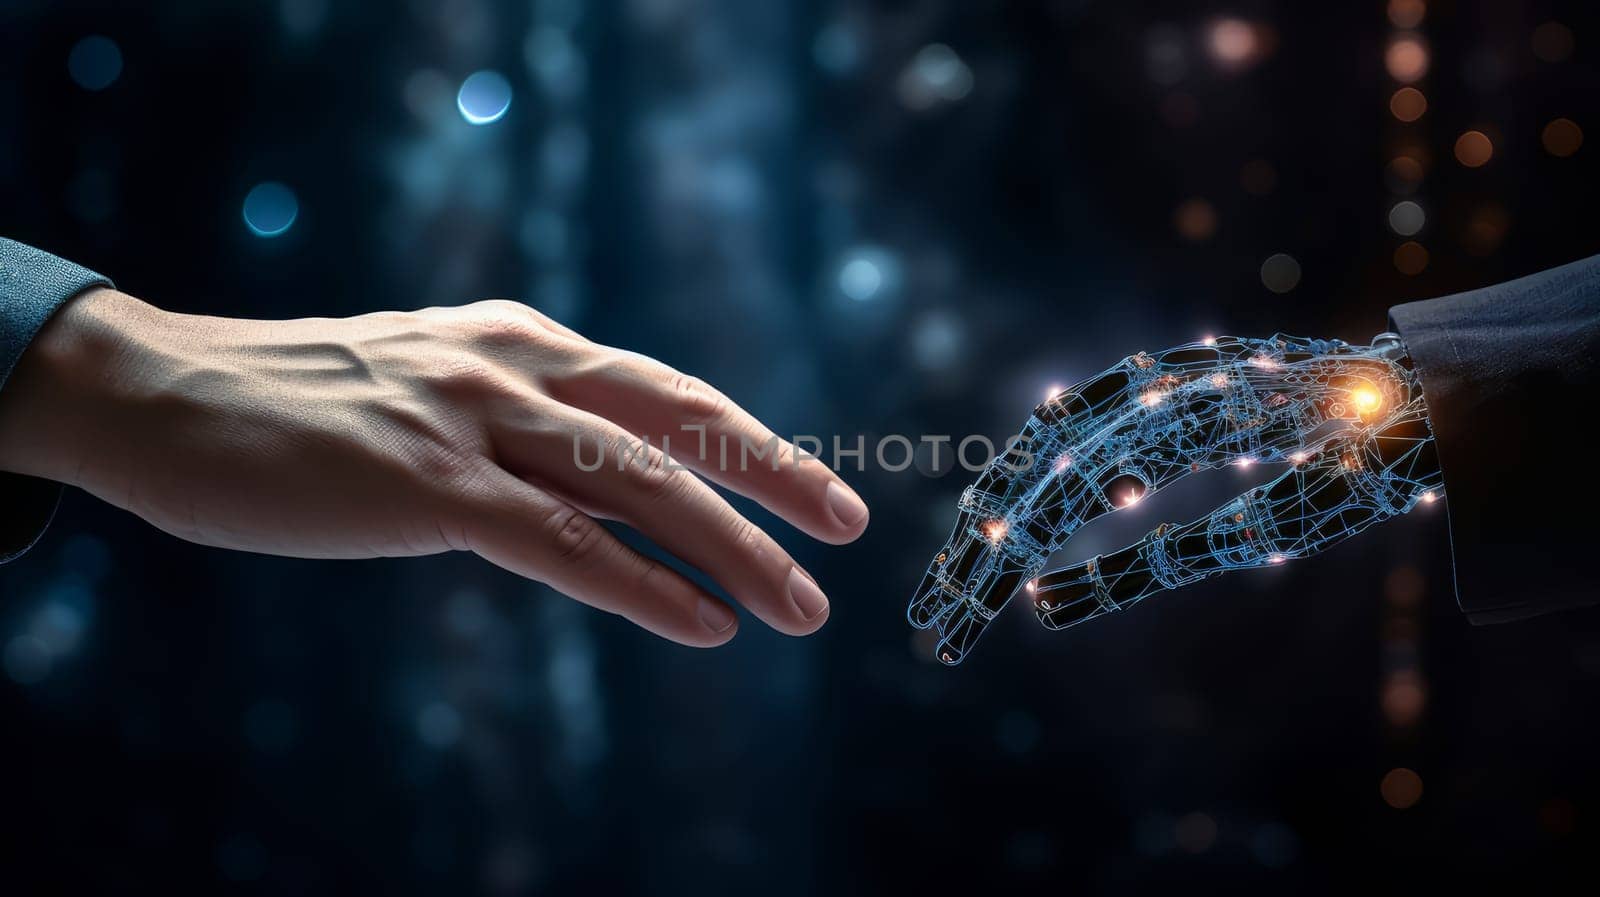 Artificial Intelligence Machine Learning Robot Hands and Human Touch. Big data and transmission protocol system. Robotics or artificial intelligence artificial intelligence connecting human interaction. Chatbot software